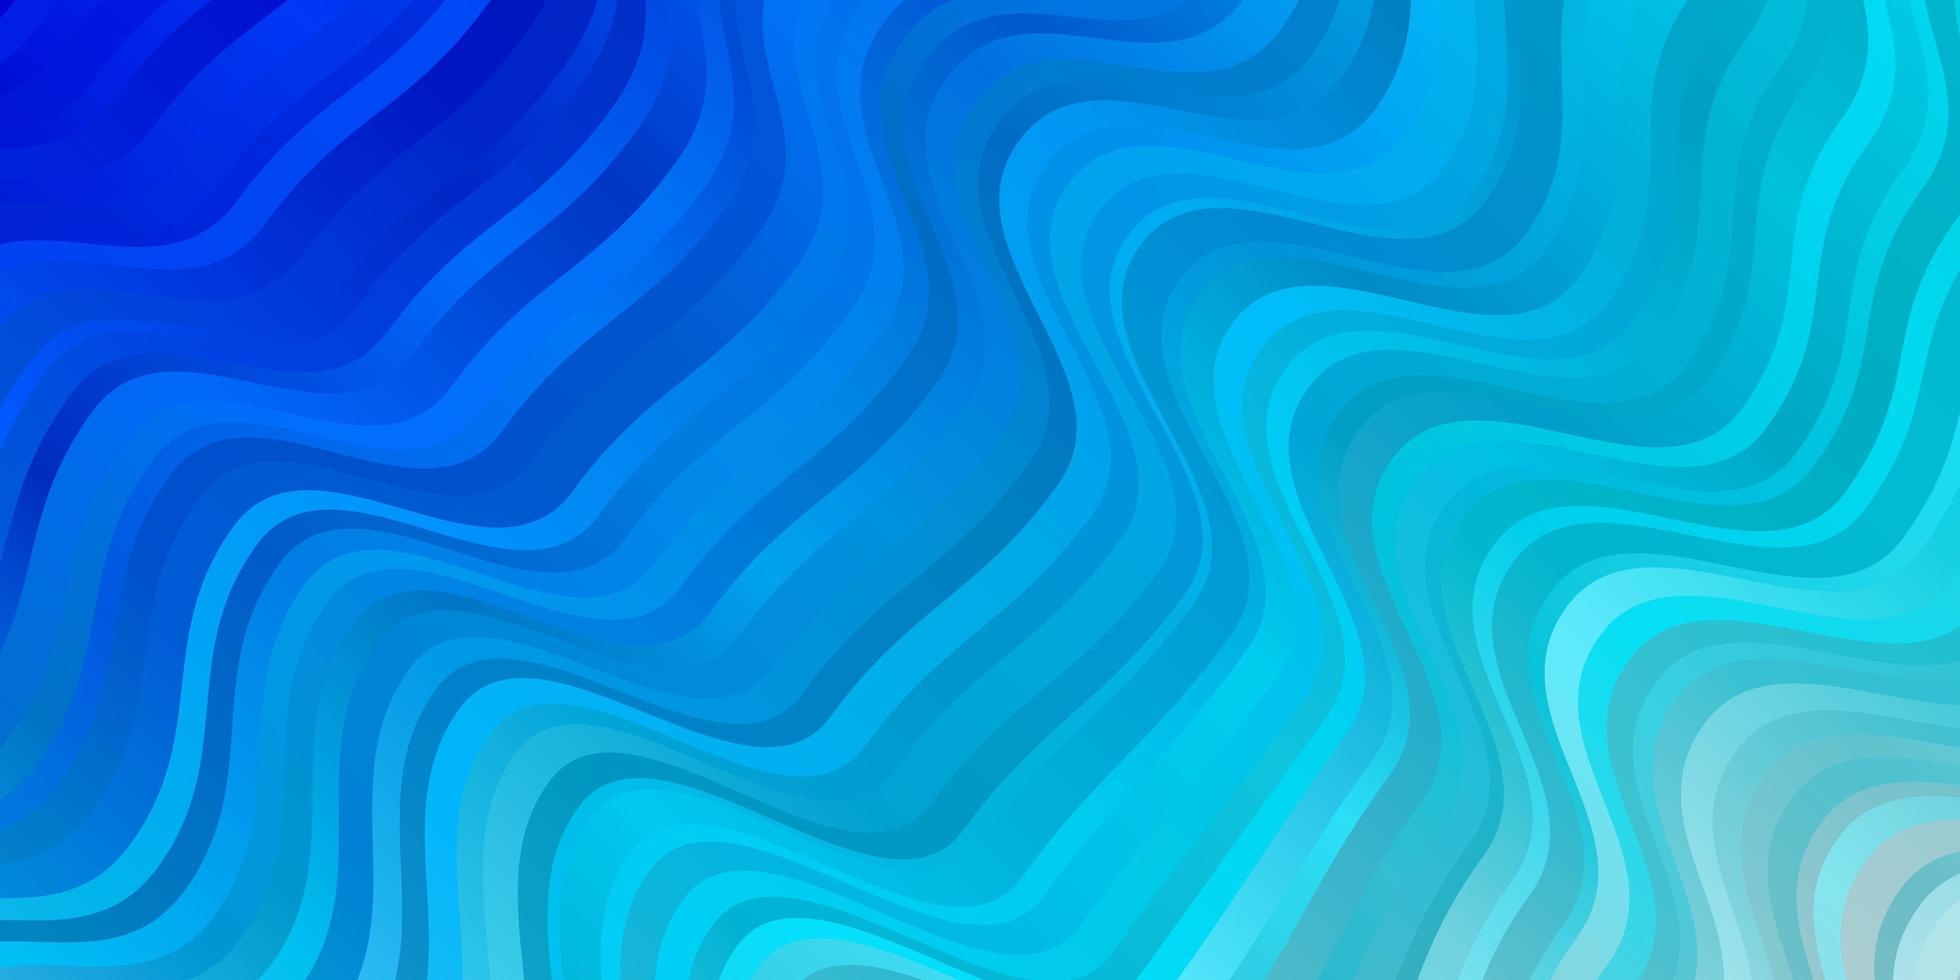 Light BLUE vector pattern with wry lines. Illustration in abstract style with gradient curved. Template for your UI design.